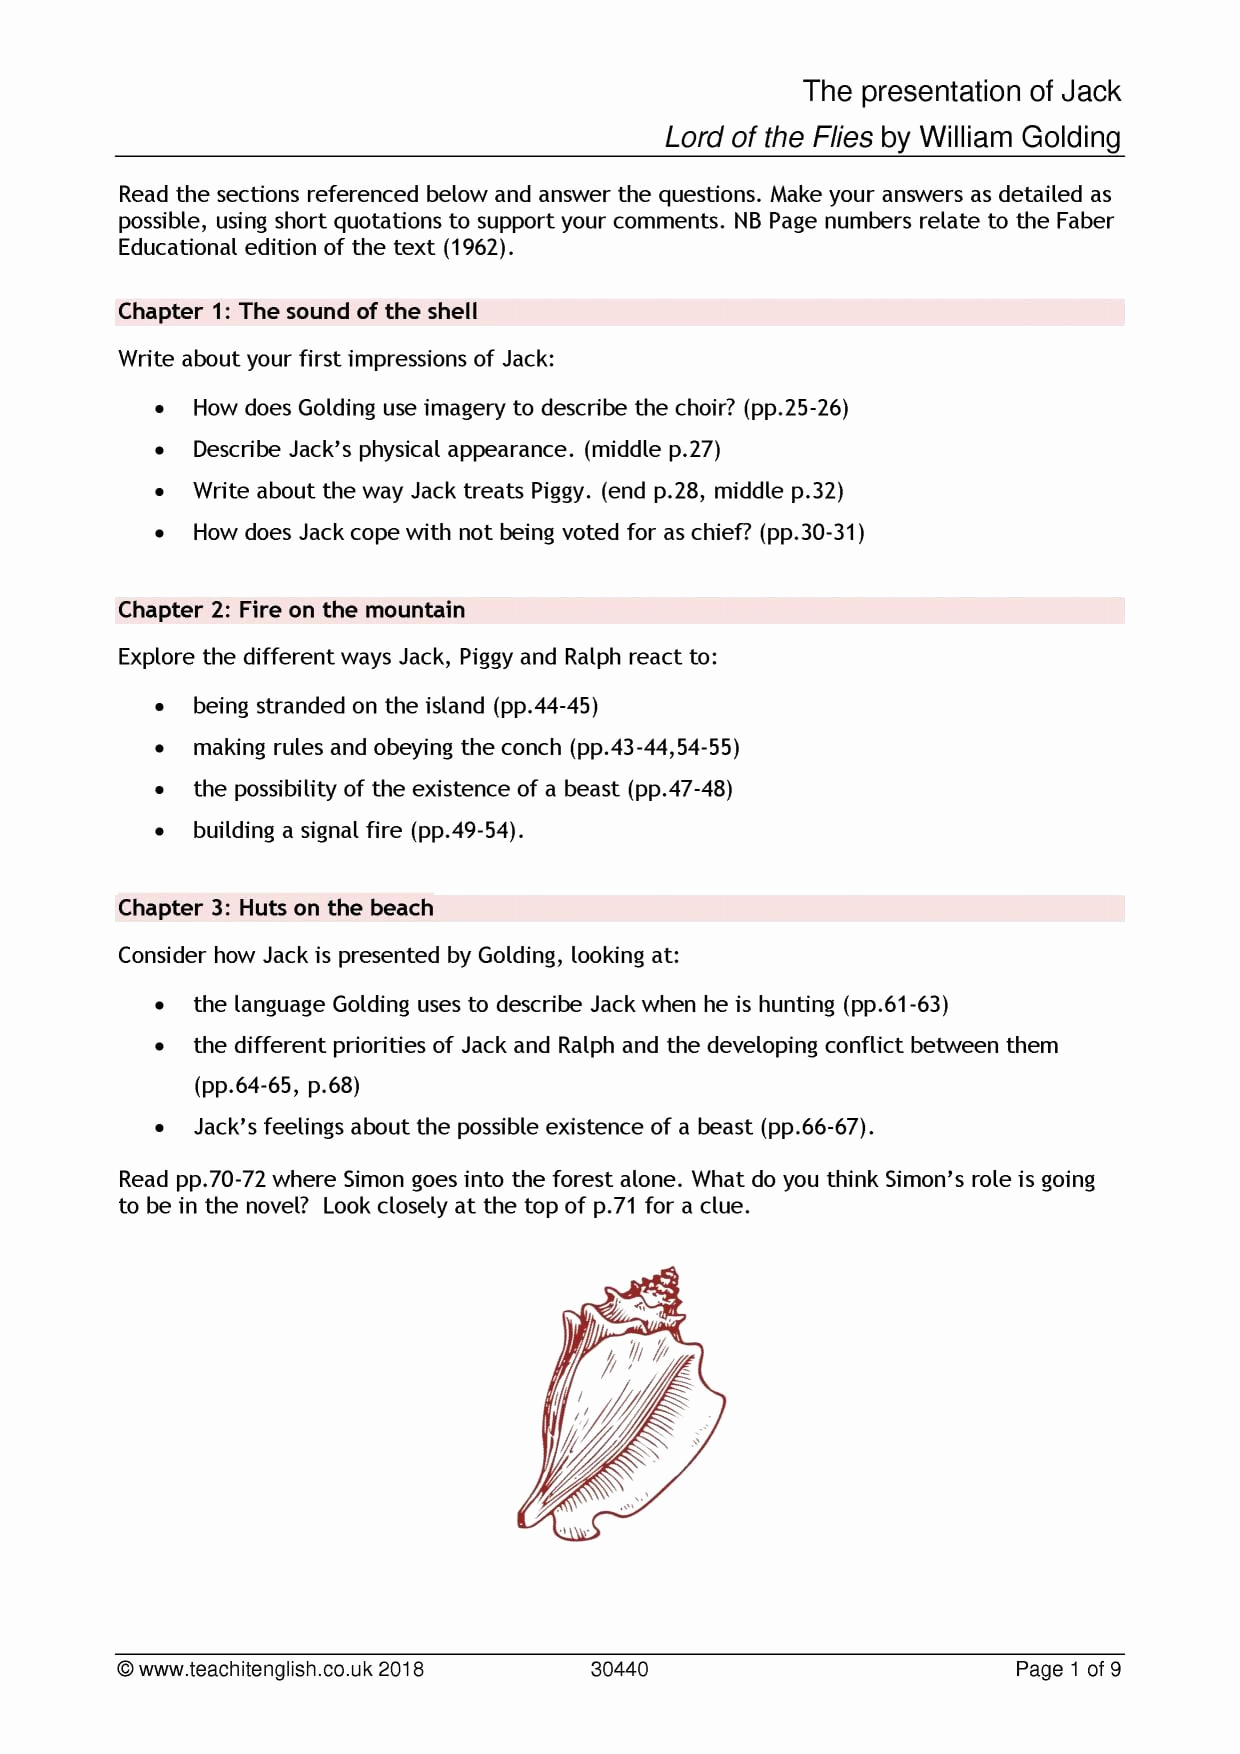 Lord Of the Flies Worksheets Luxury Lord the Flies while Reading Chapter 4 Worksheet